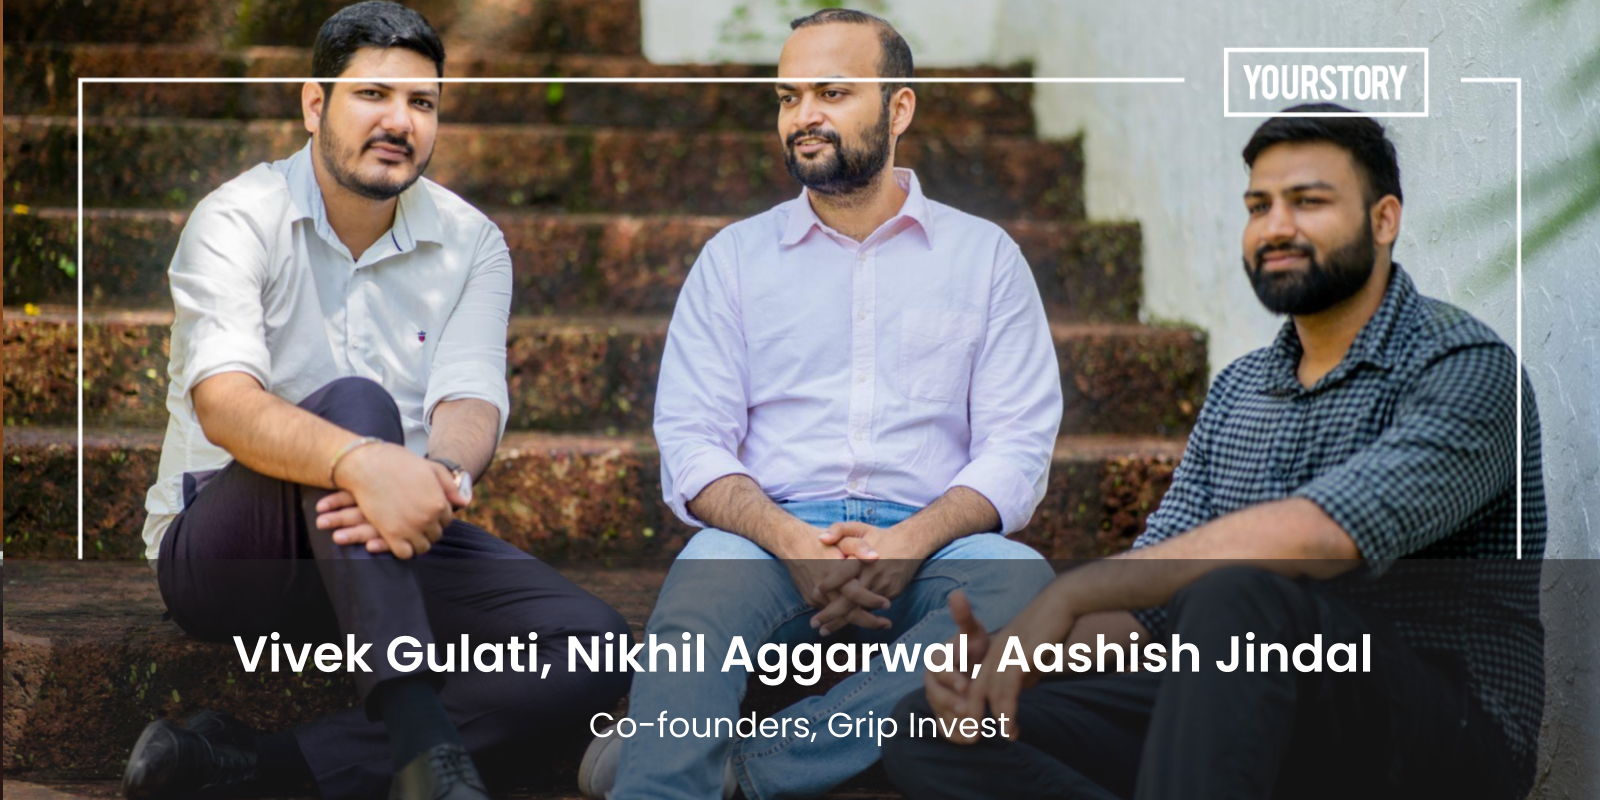 [YS Exclusive] In a first, investment-tech startup Grip Invest turns users into shareholders; raises $1M